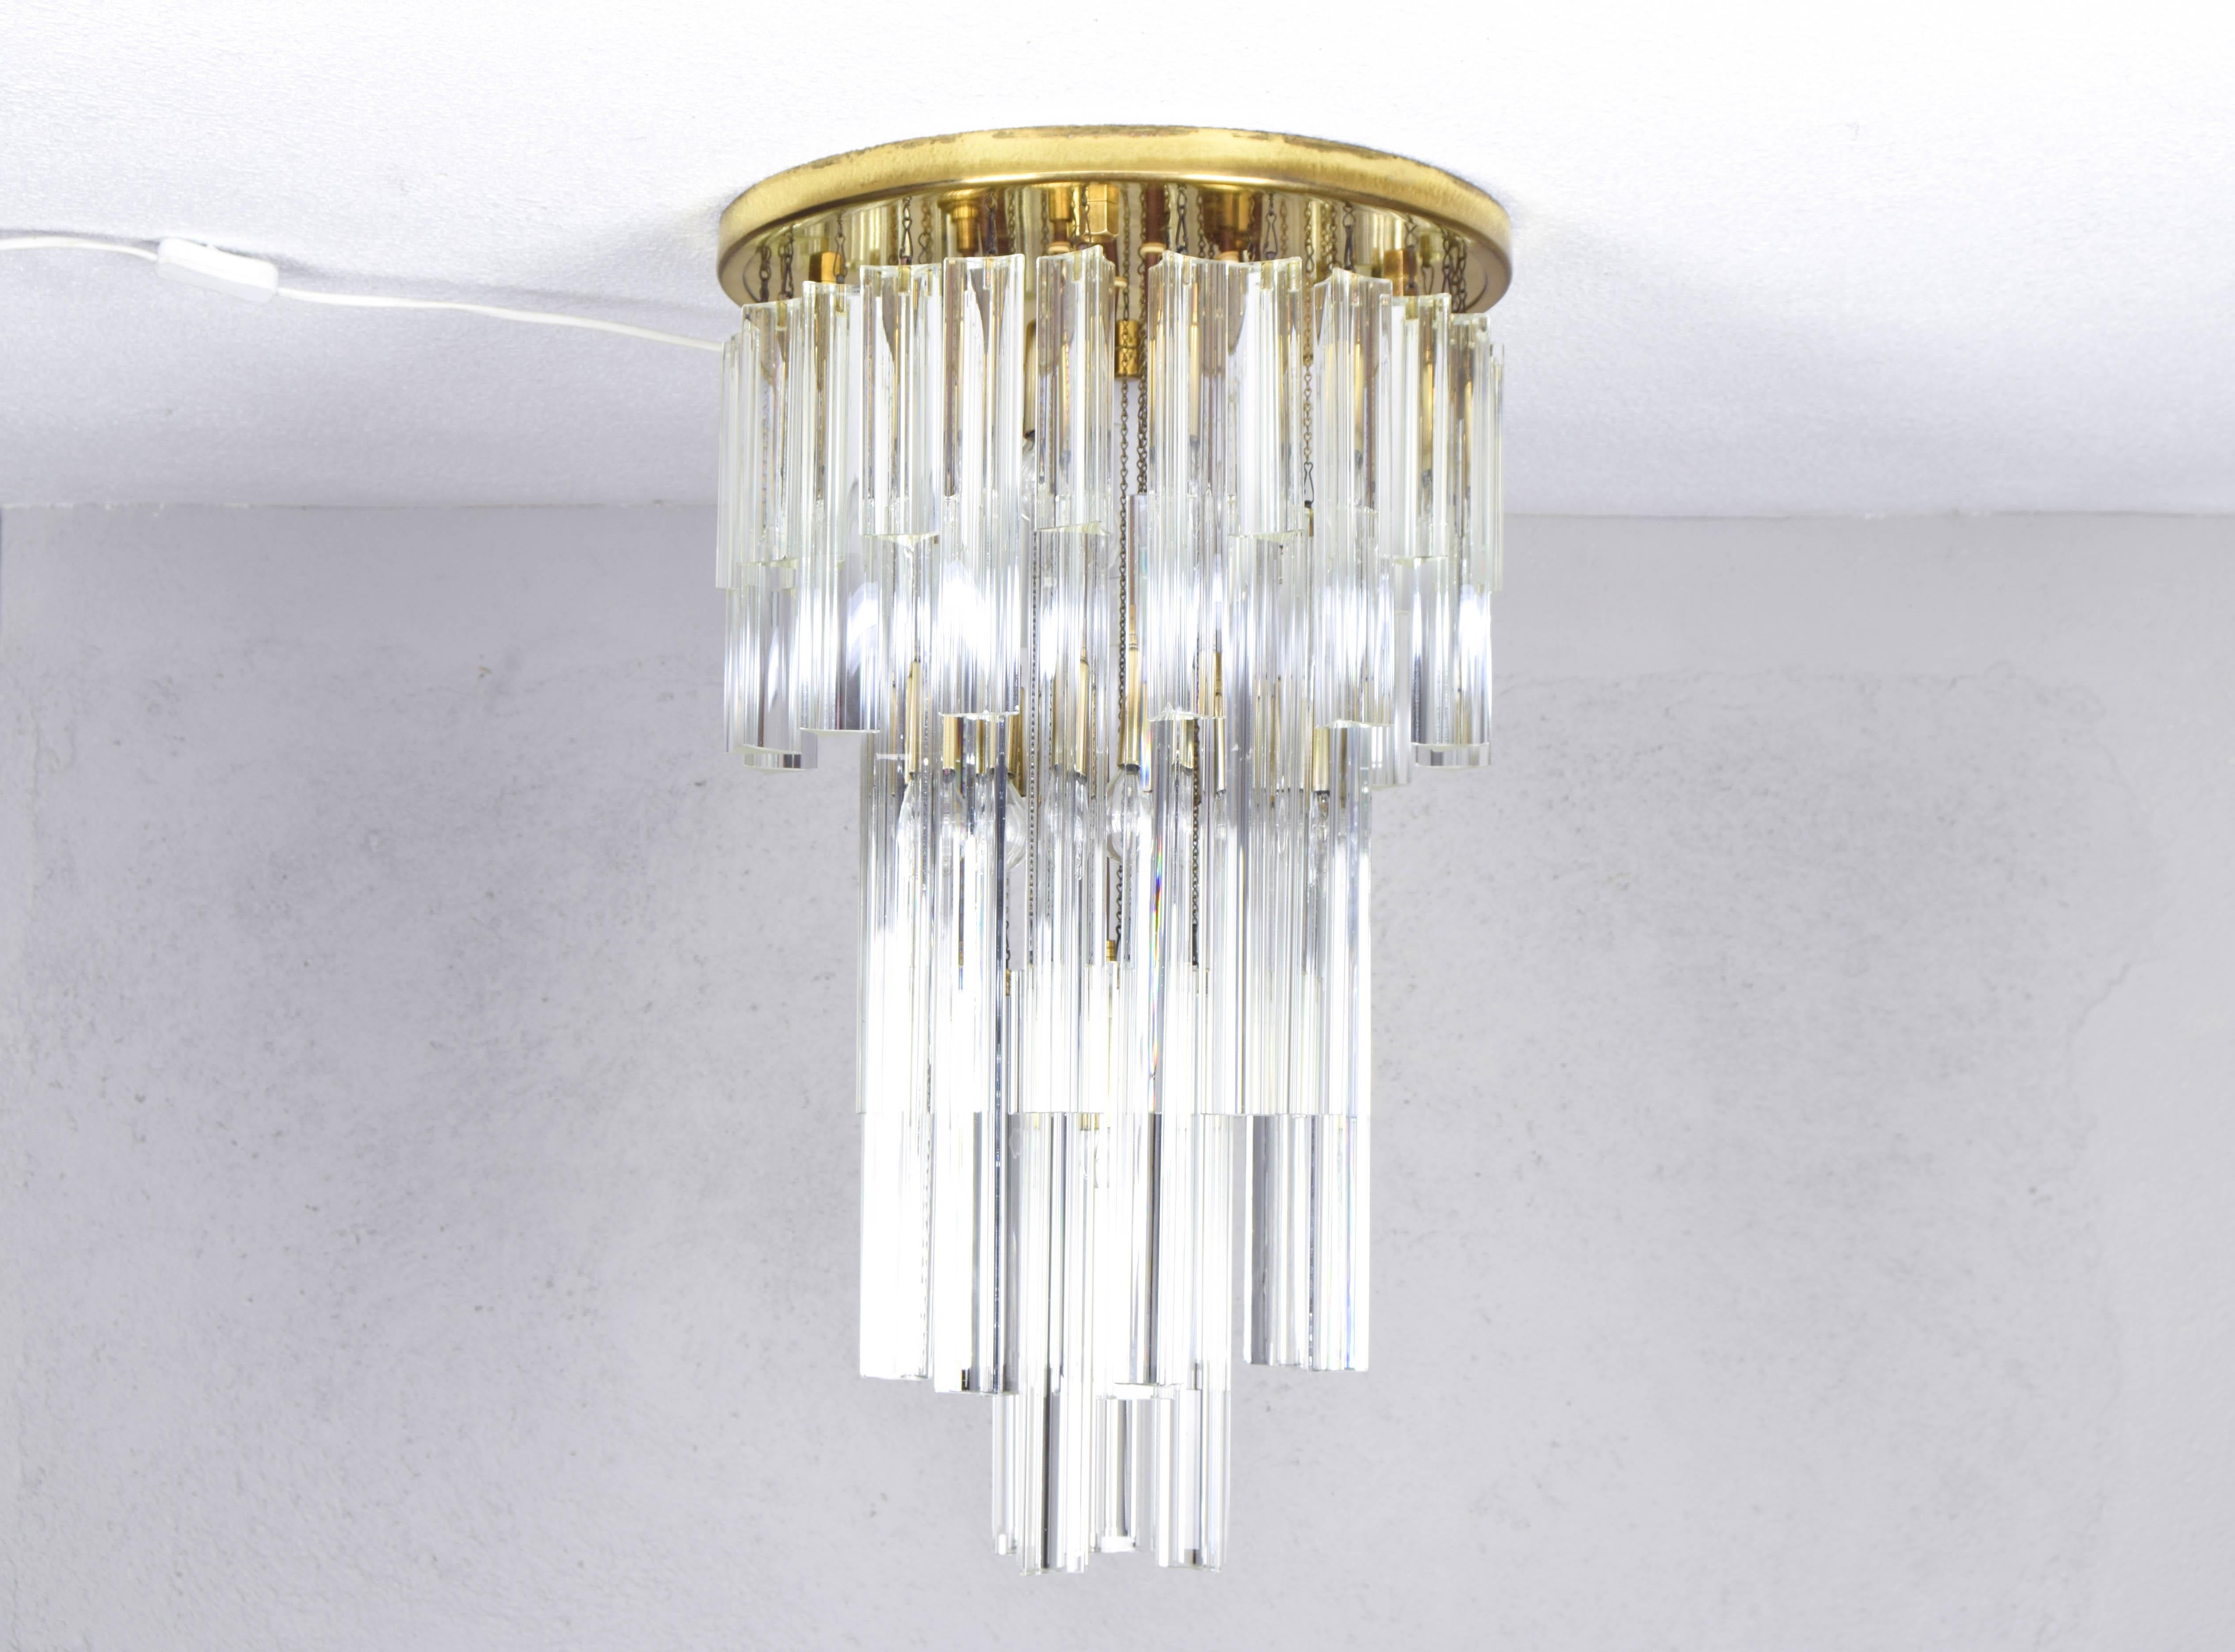 Spectacular, dazzling, elegant, beautiful.
All is little for this flush mount chandelier.
Piece by Venini made up of a brass-plated base with chains from which hang 48 Venetian Triedri de Murano glass, alternating sizes and forming a cascade of